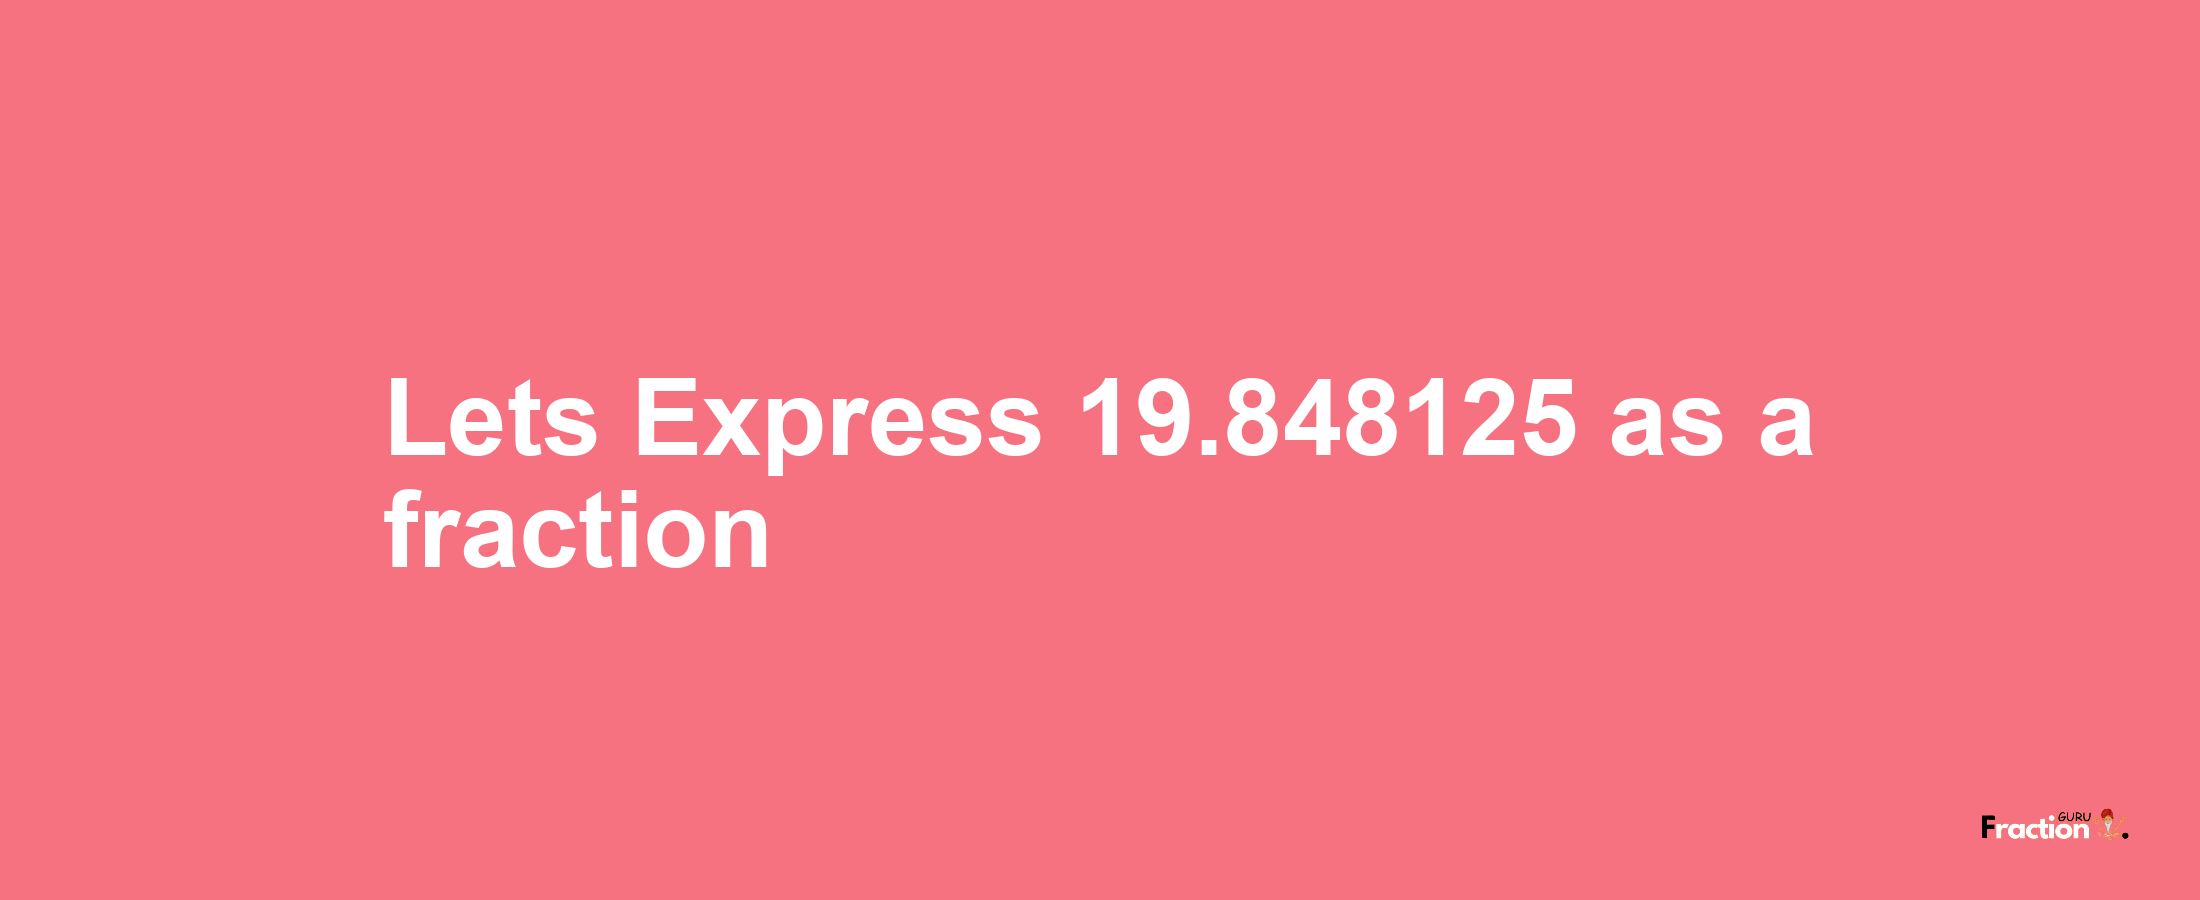 Lets Express 19.848125 as afraction